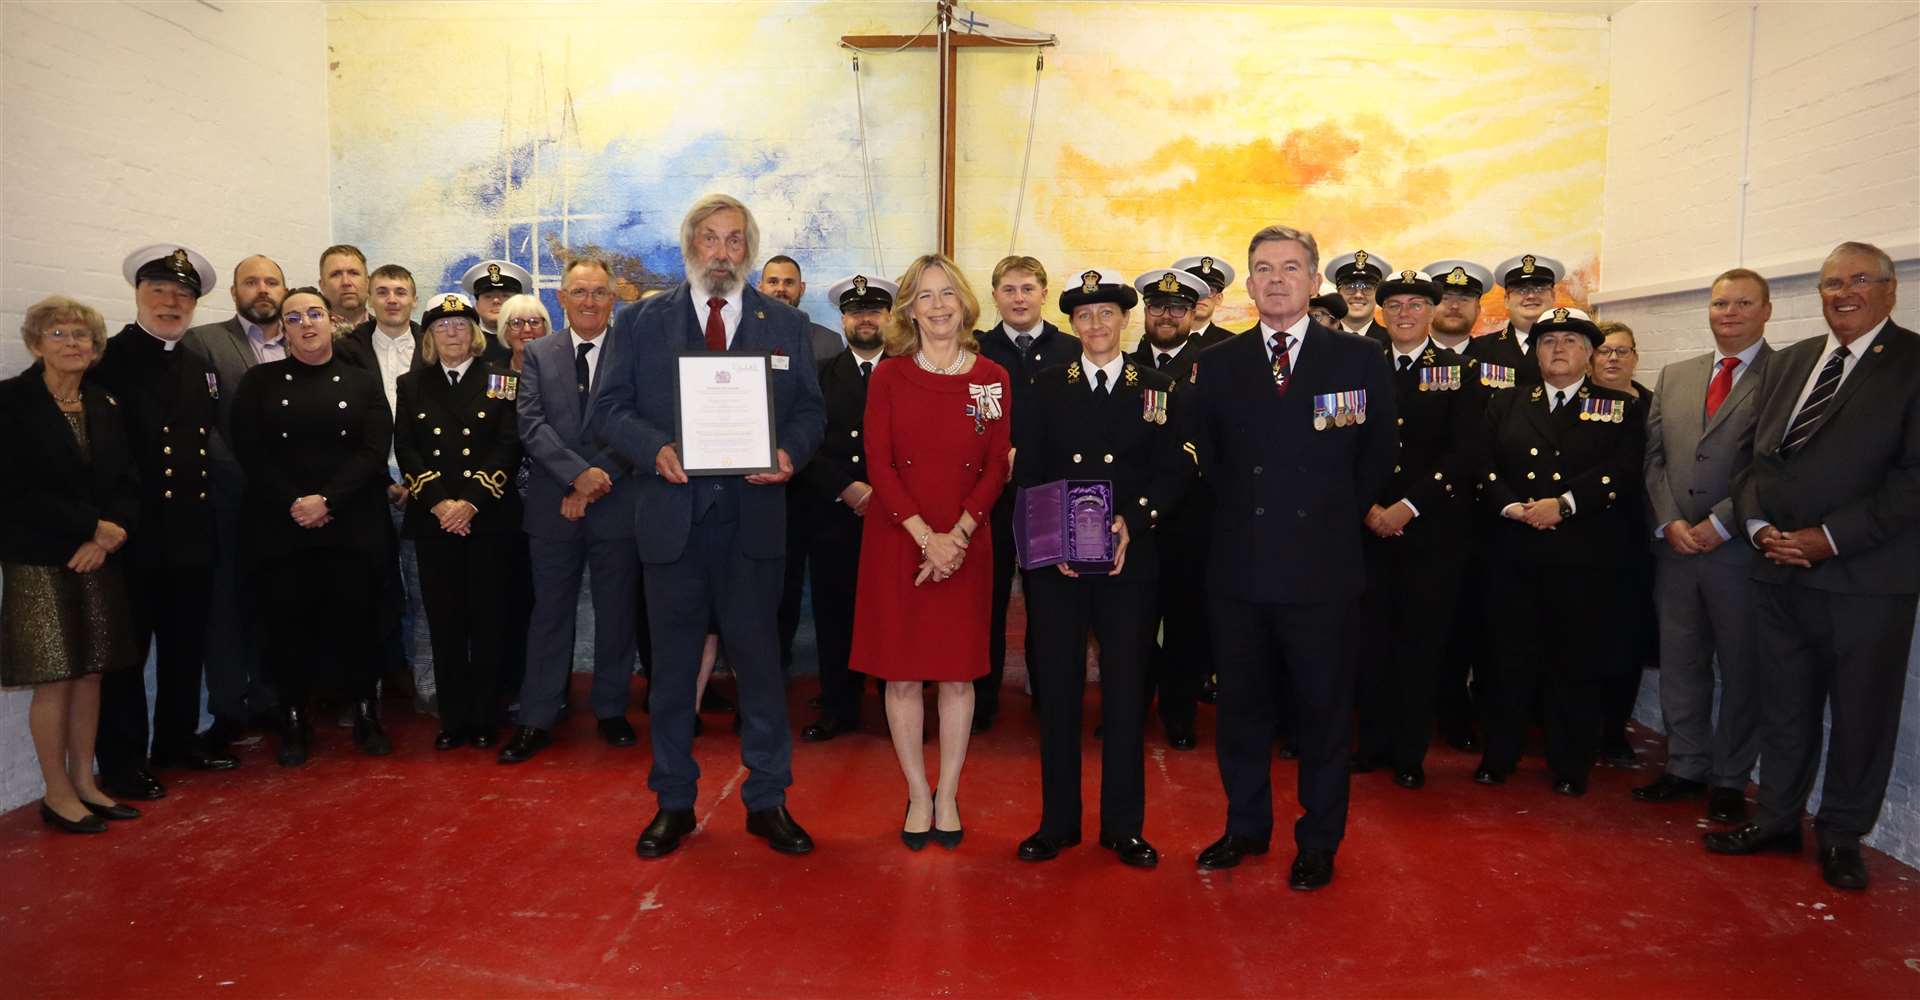 Lord Lieutenant of Kent Lady Colgrain with the Queen's Award for Voluntary Service at Sheppey Sea Cadets' headquarters at Barton's Point, Sheerness